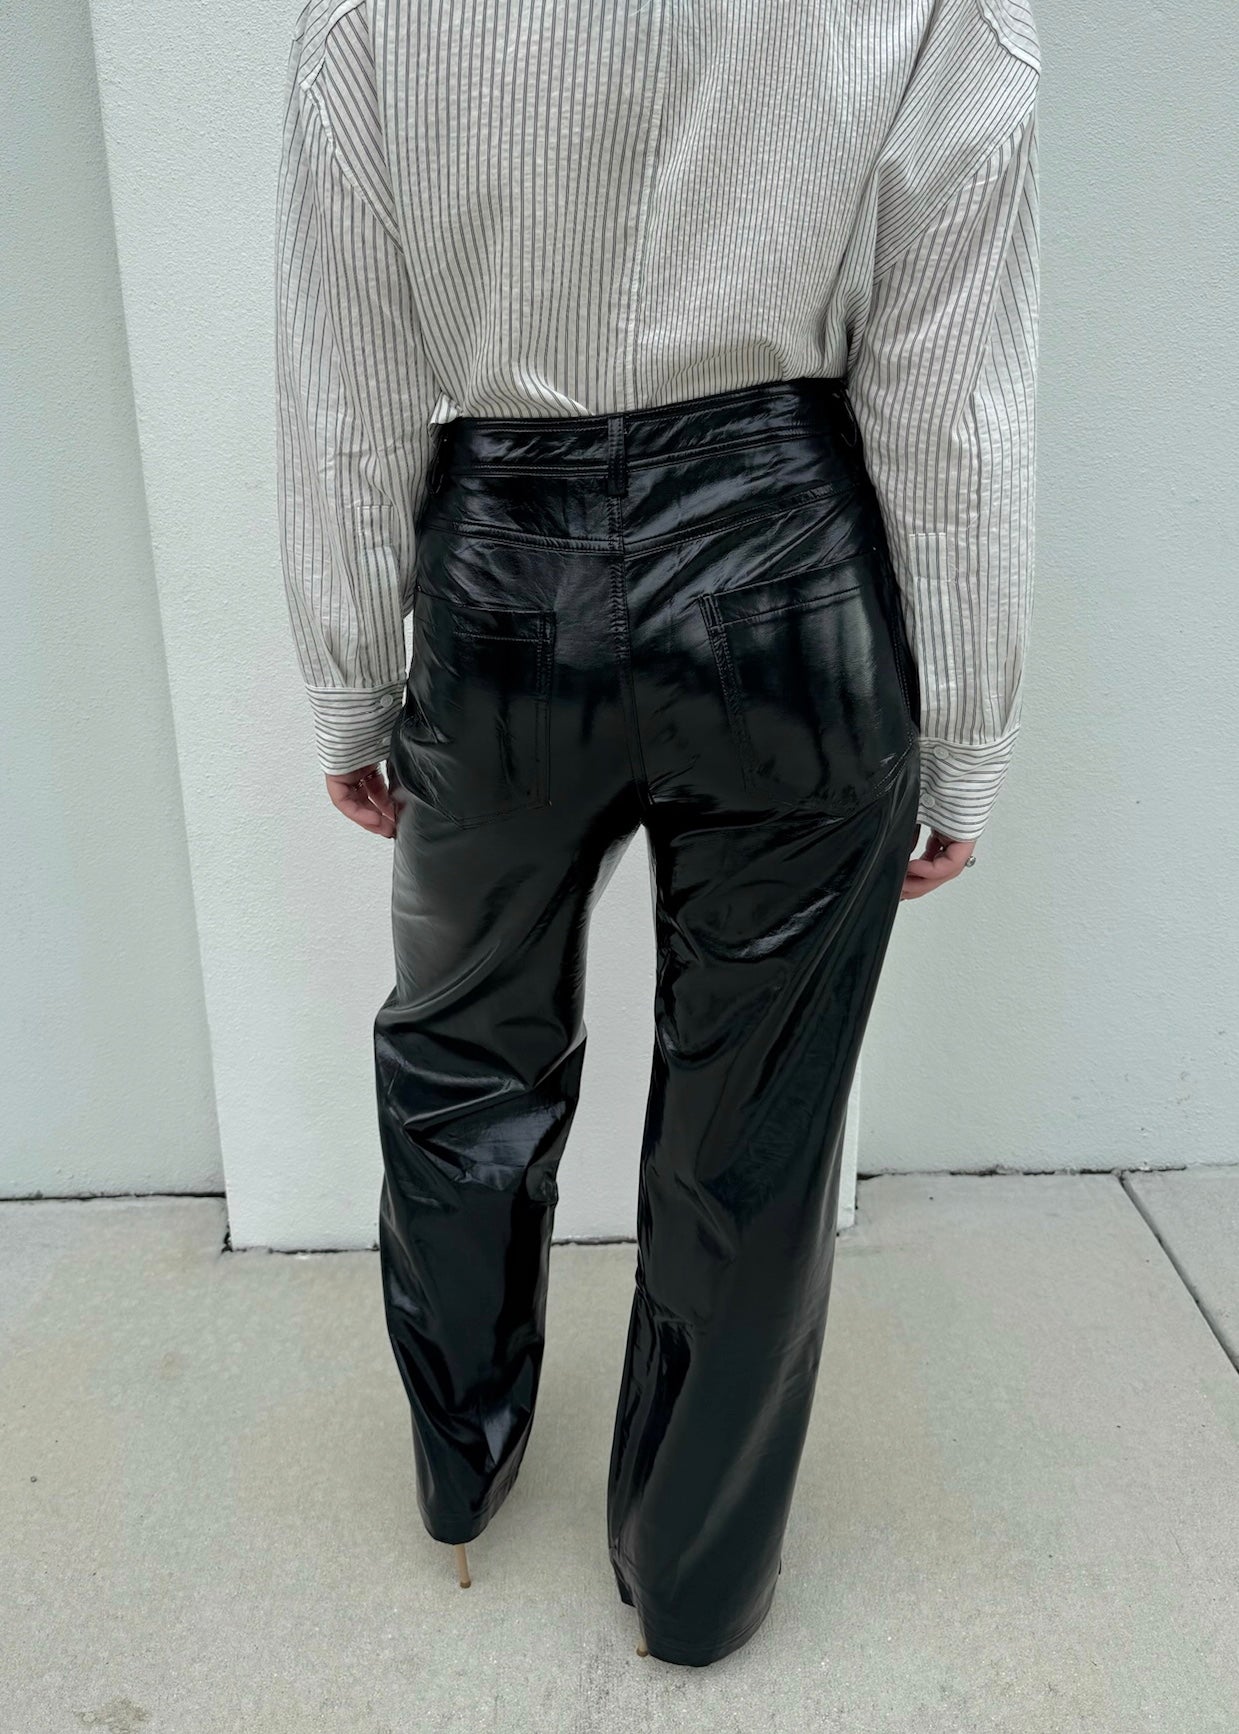 Women's Leather Trousers | Explore our New Arrivals | ZARA United Kingdom